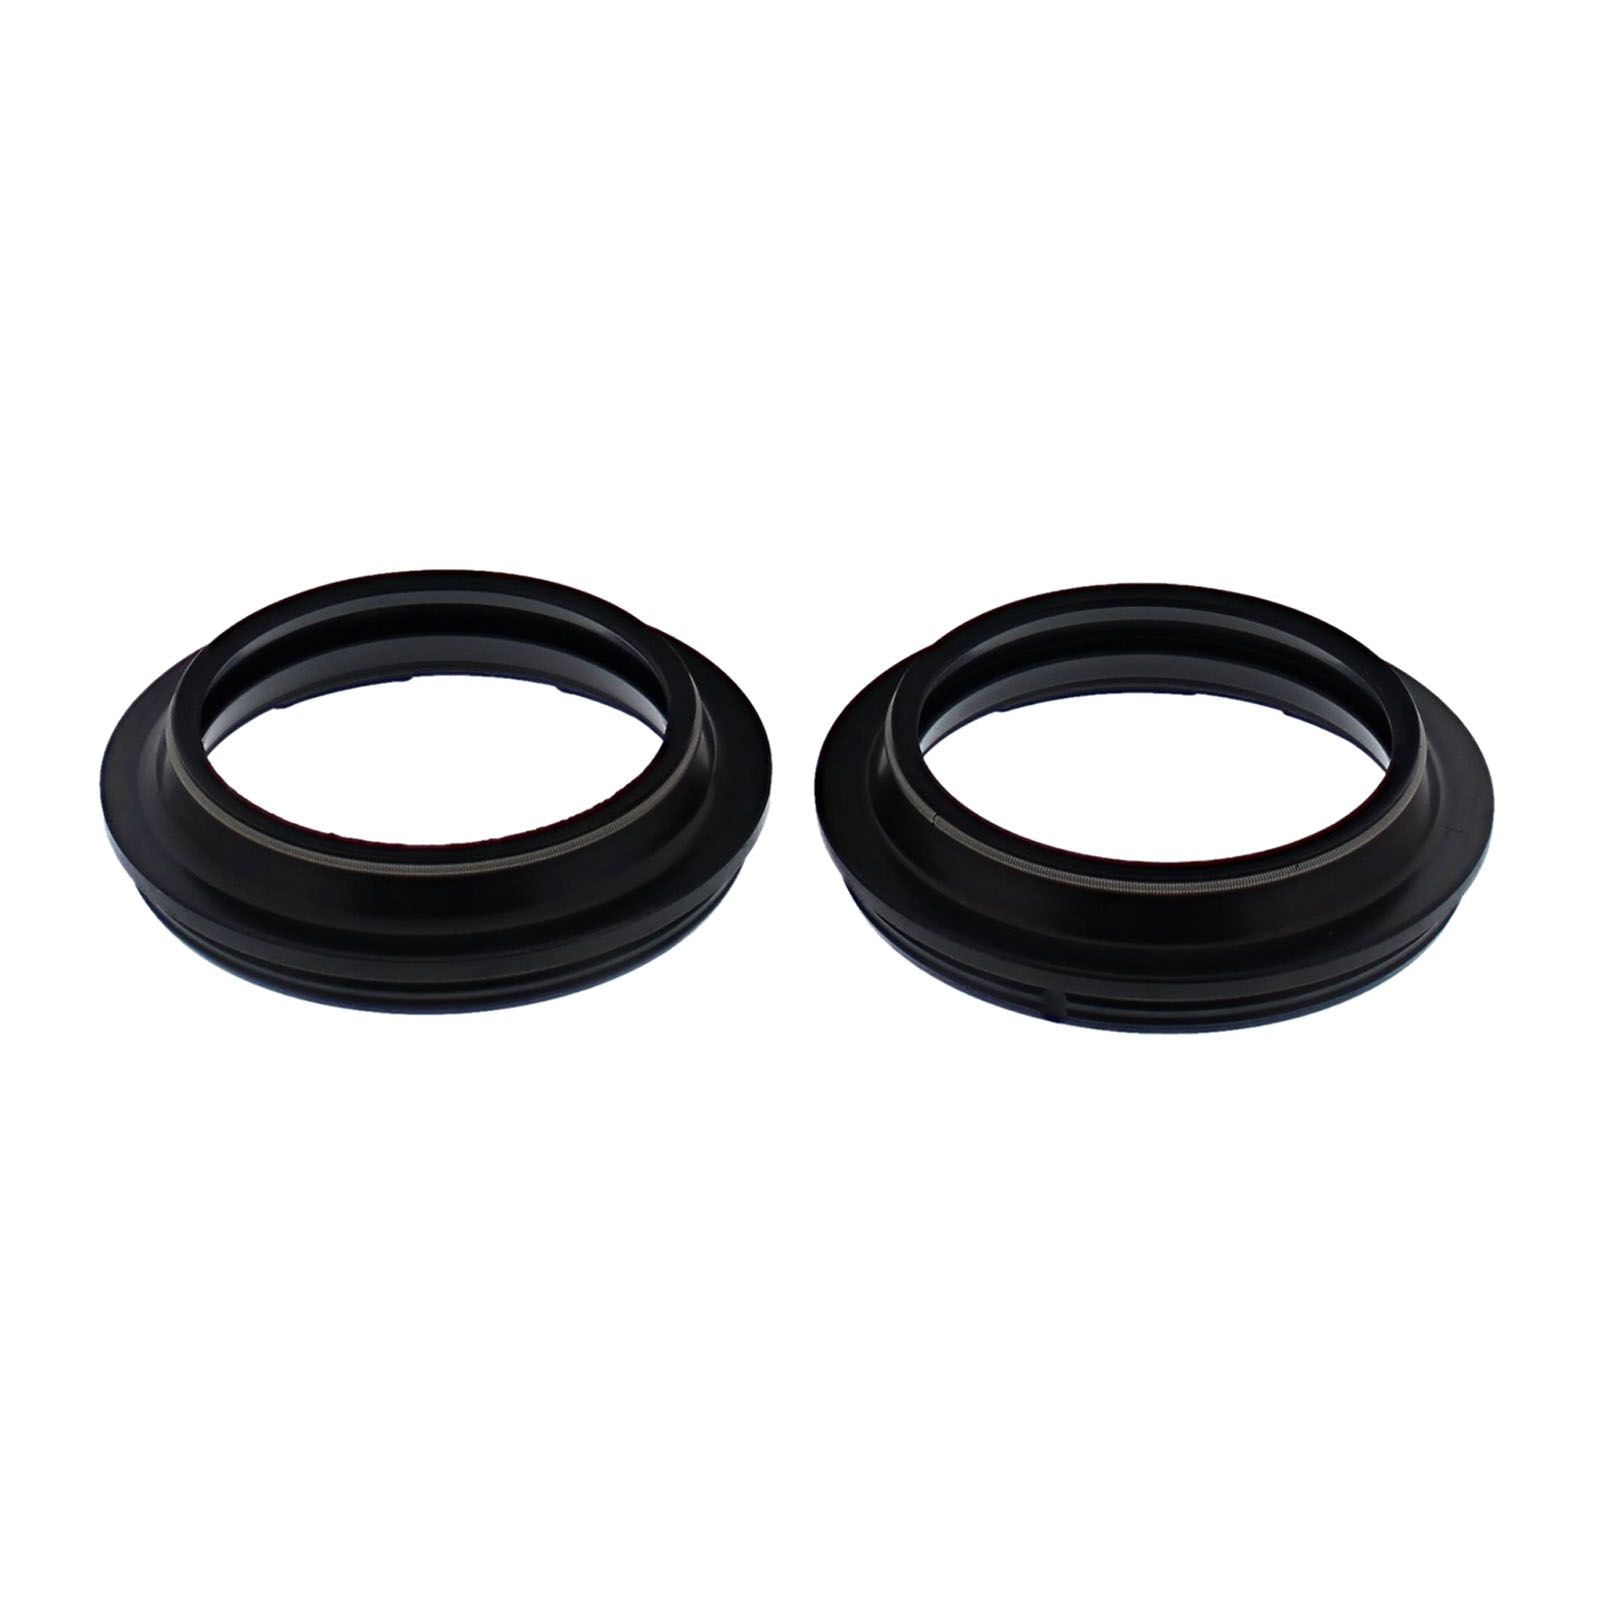 New ALL BALLS Racing Fork Dust Seal Kit #AB57171